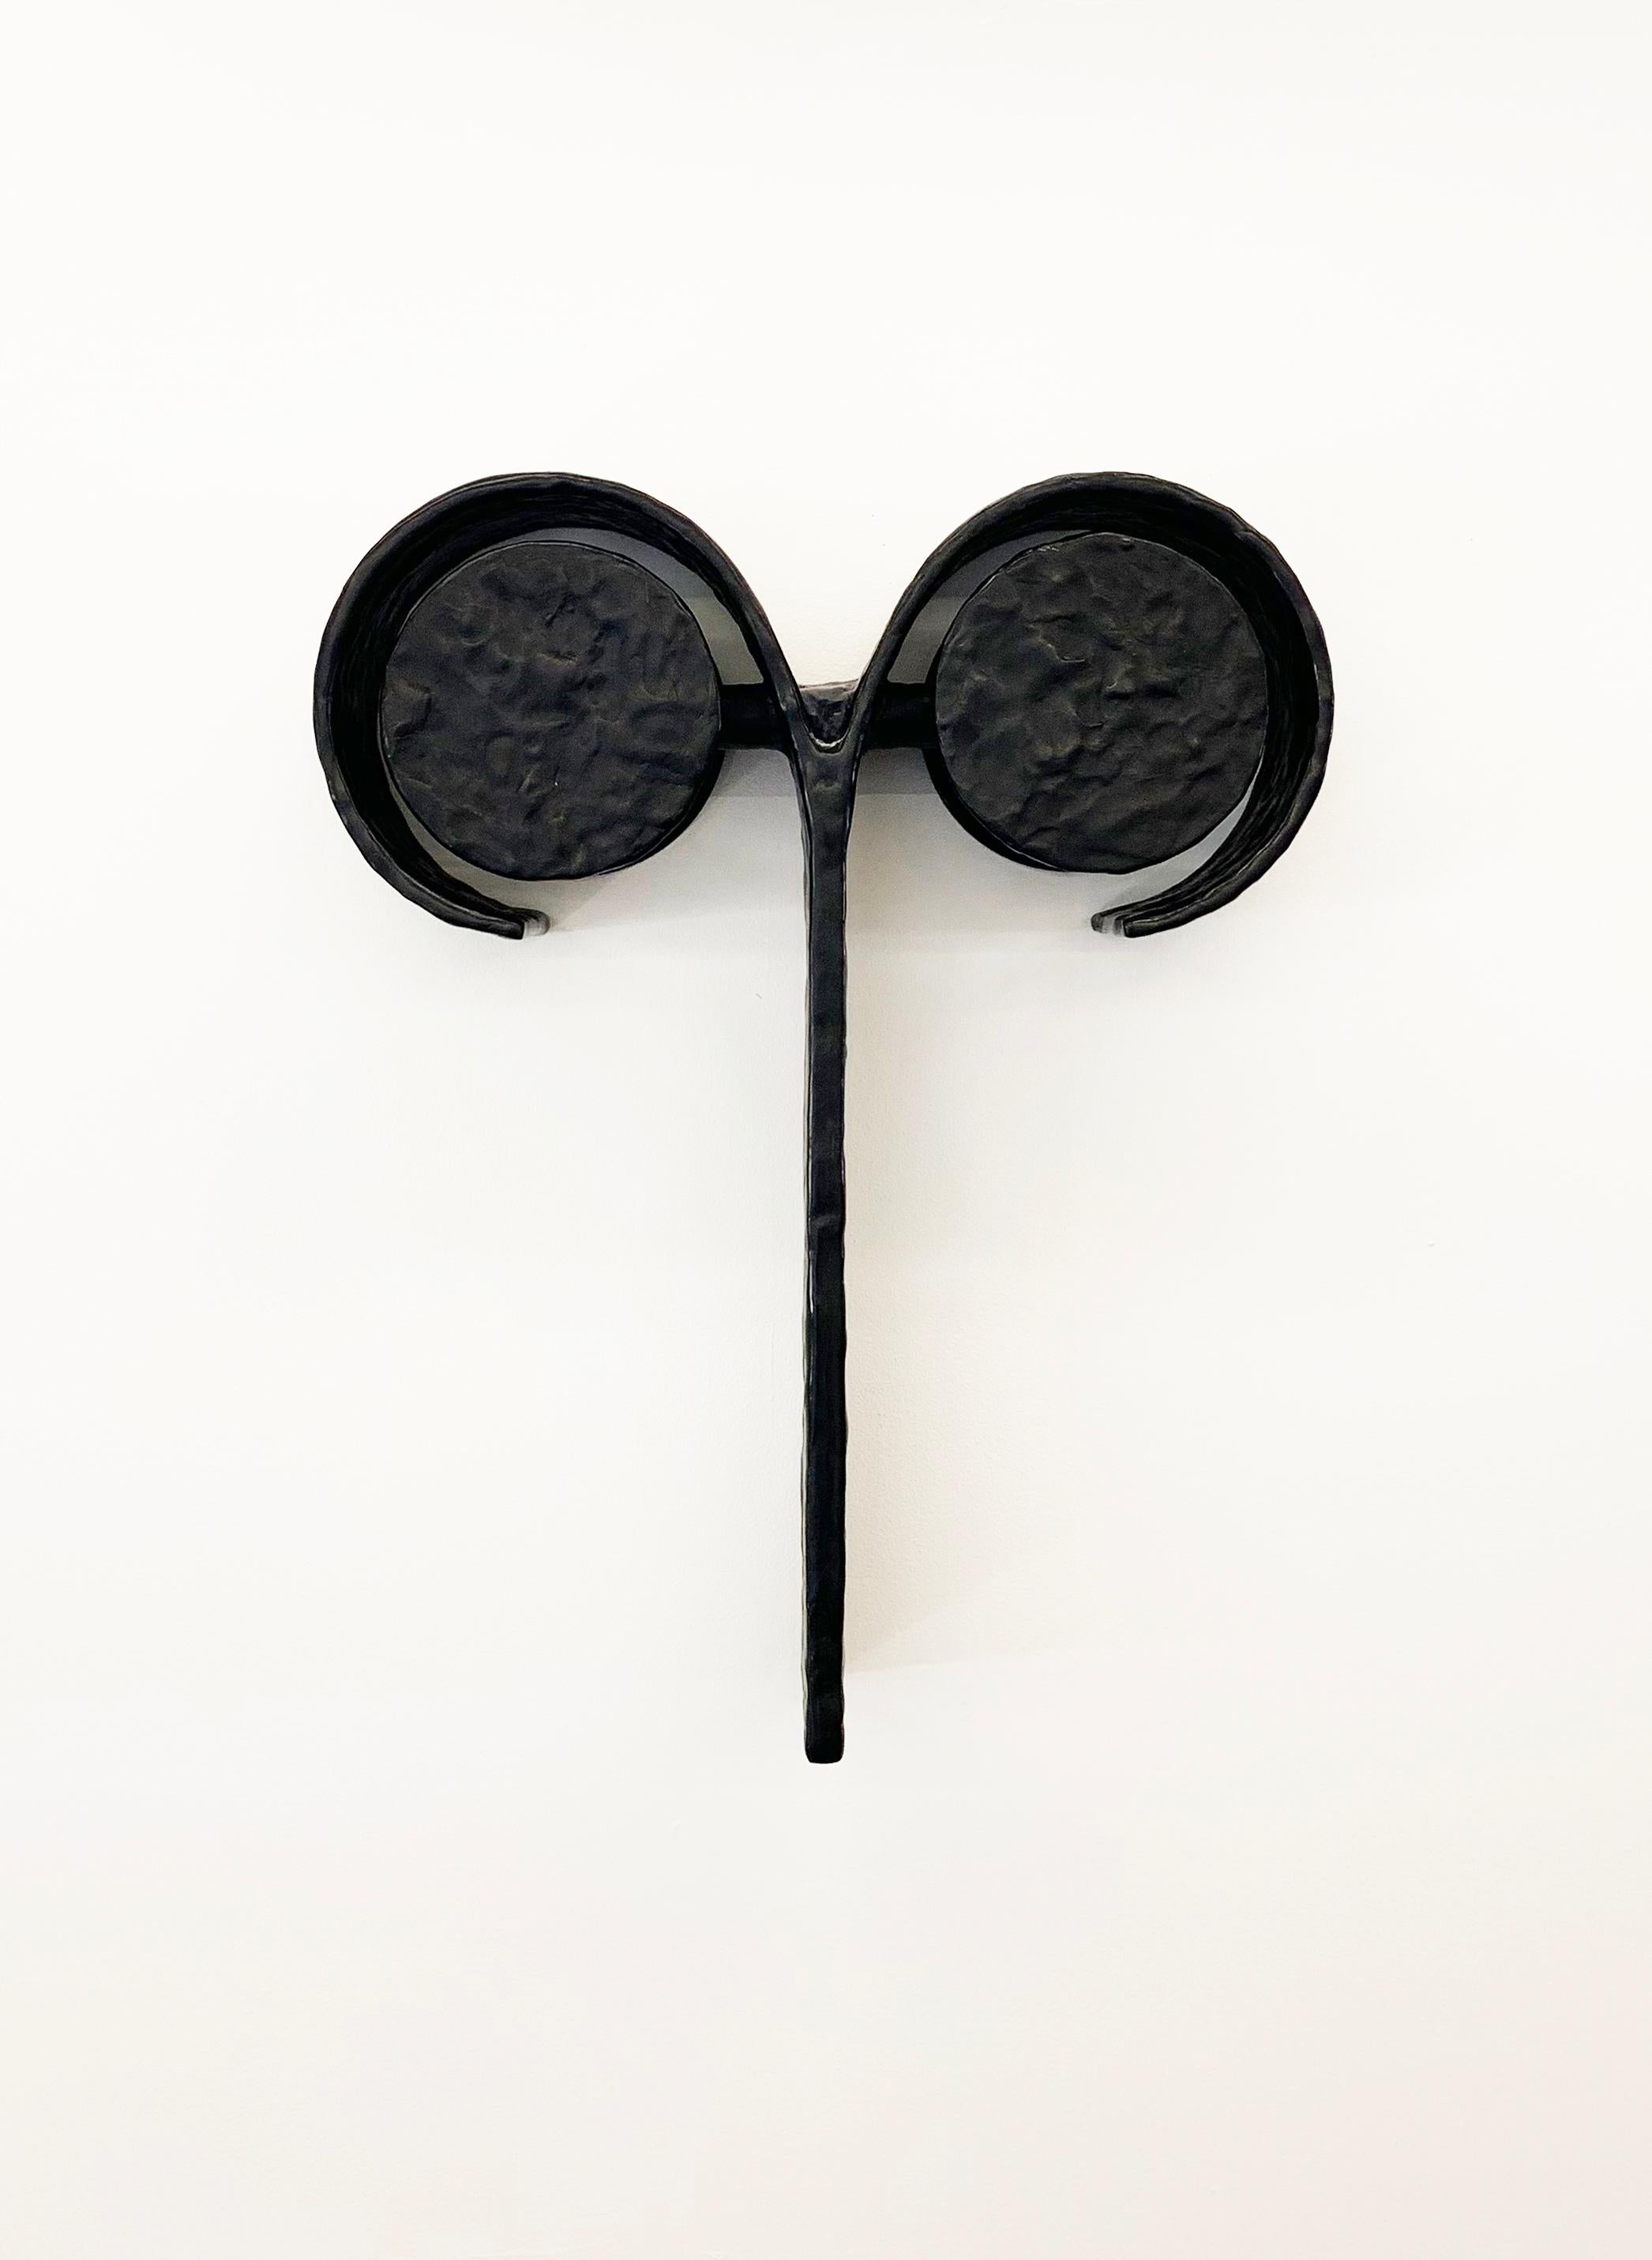 Material Lust [American, b. 1981, 1986]
Special Edition Khnum Sconce, 2015 
Shown in black epoxy
Measures: 21